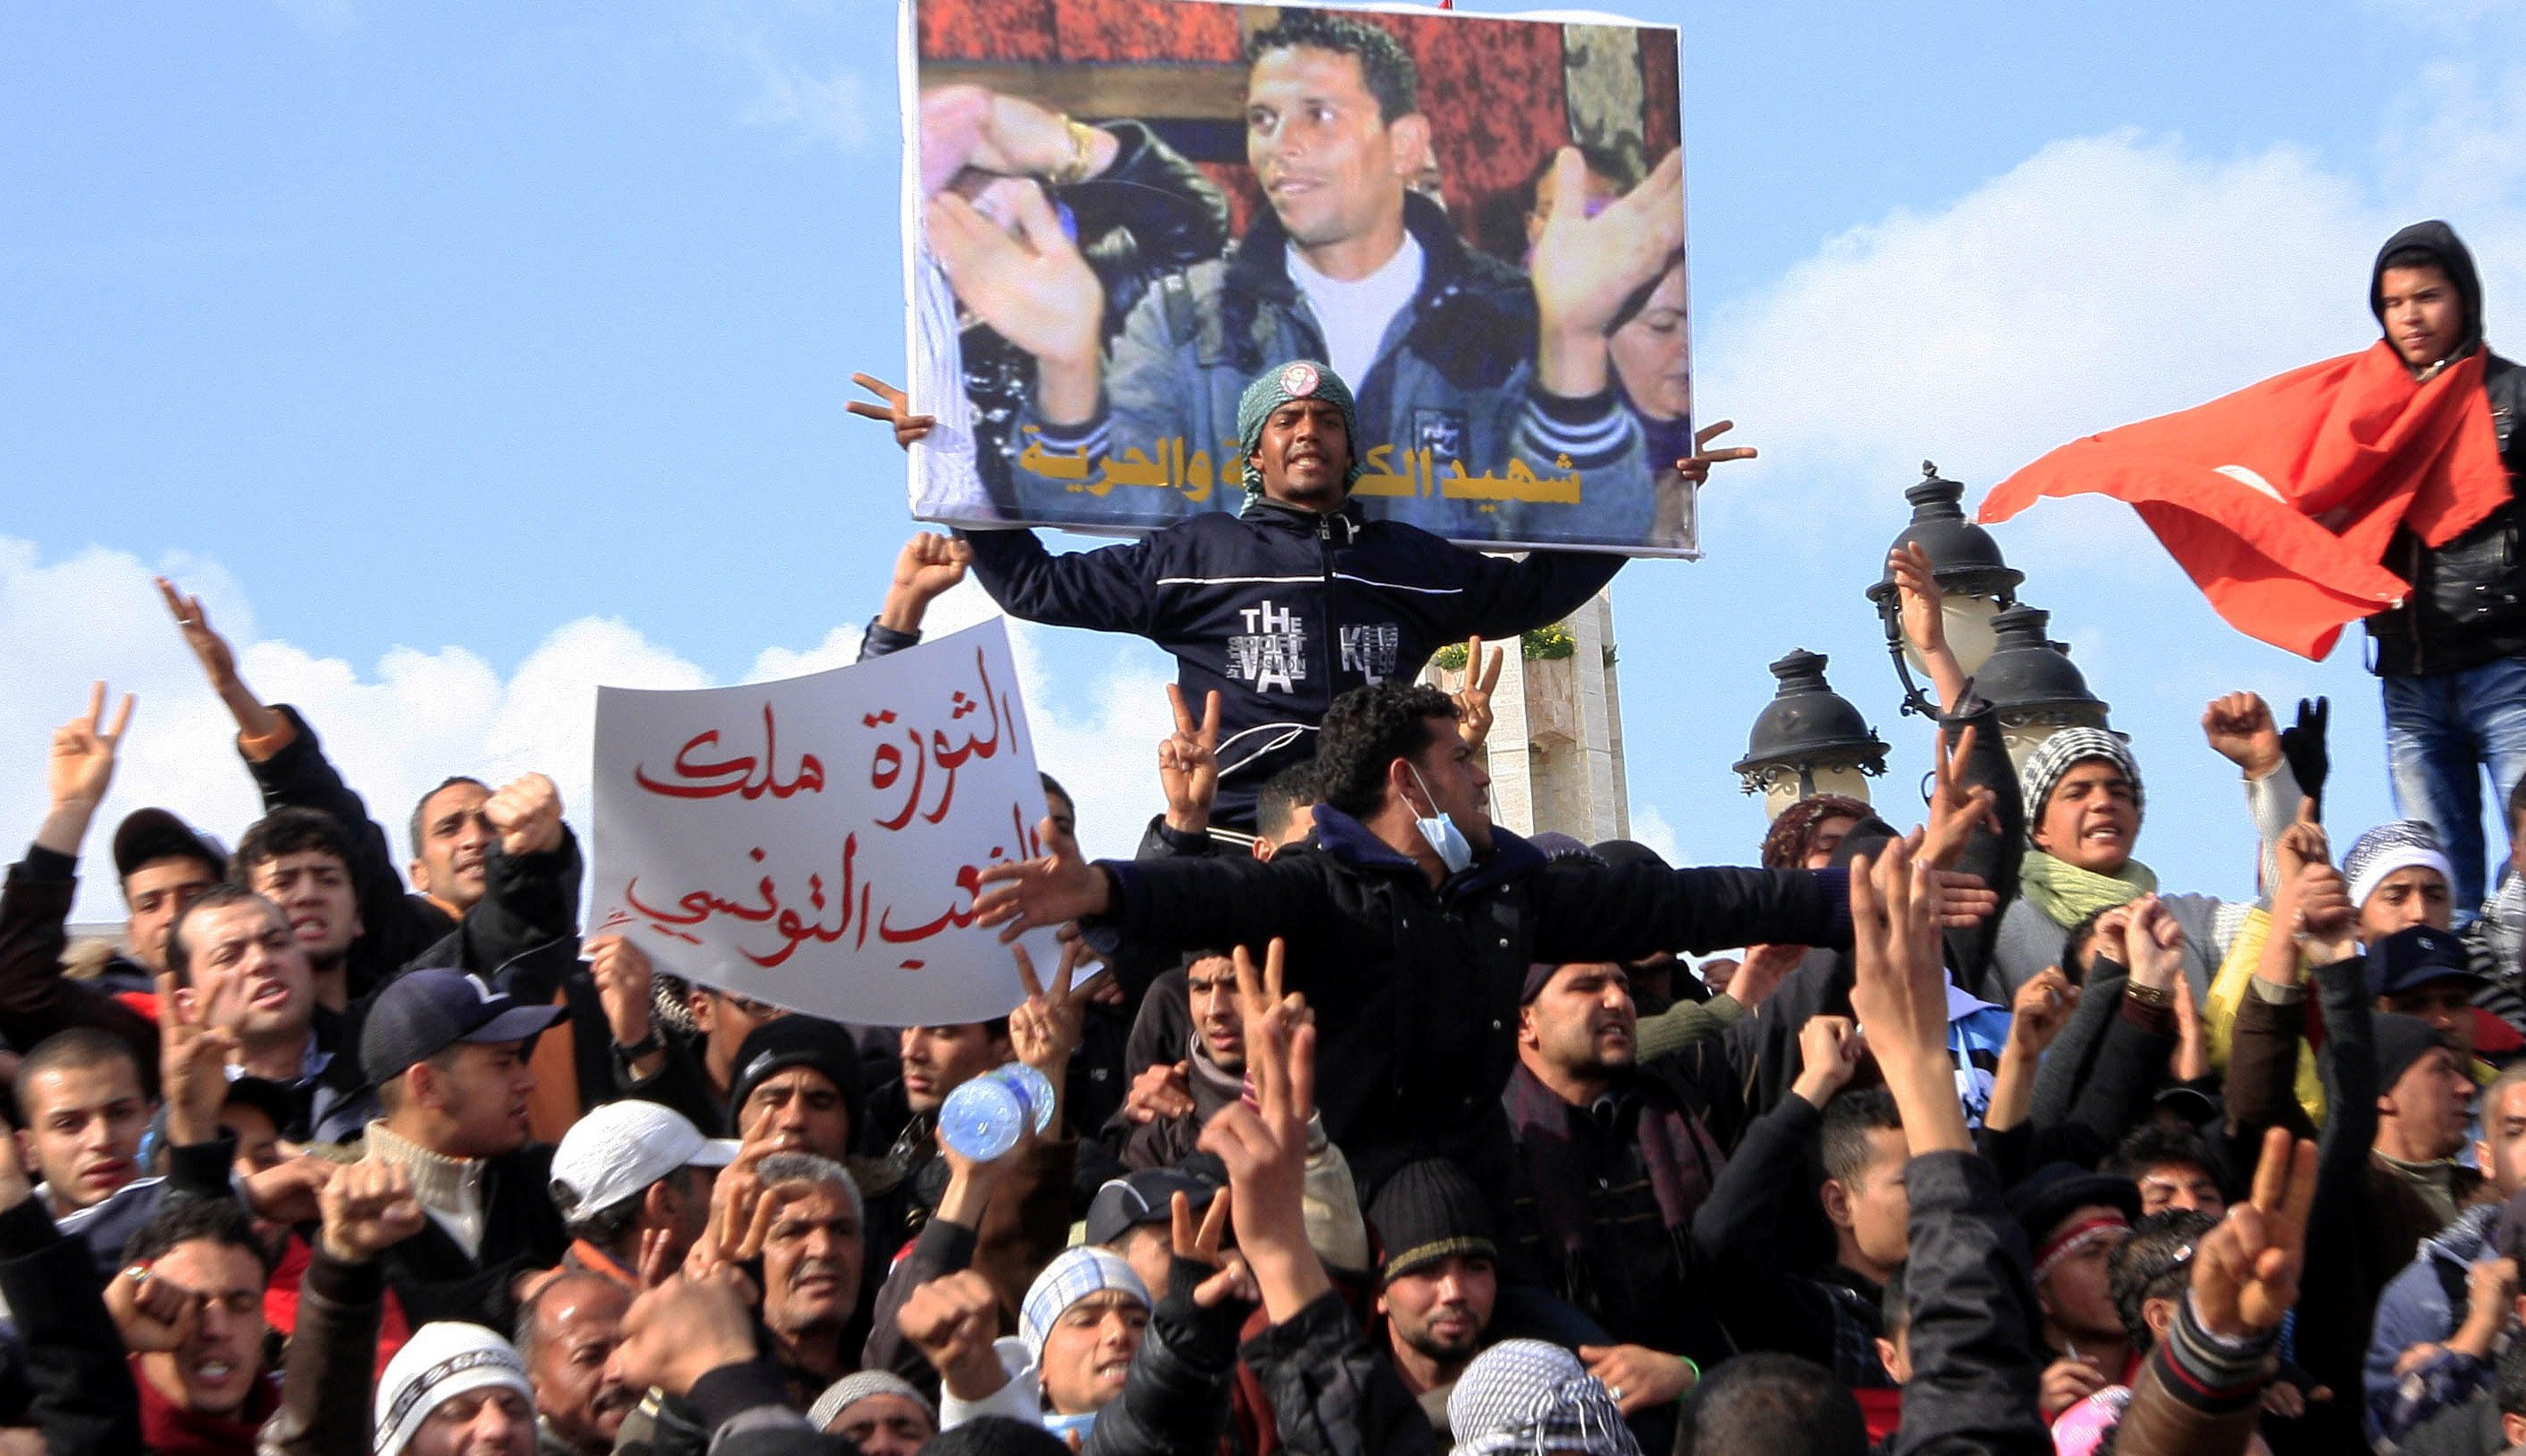 Remembering Mohamed Bouazizi: The man who sparked the Arab Spring